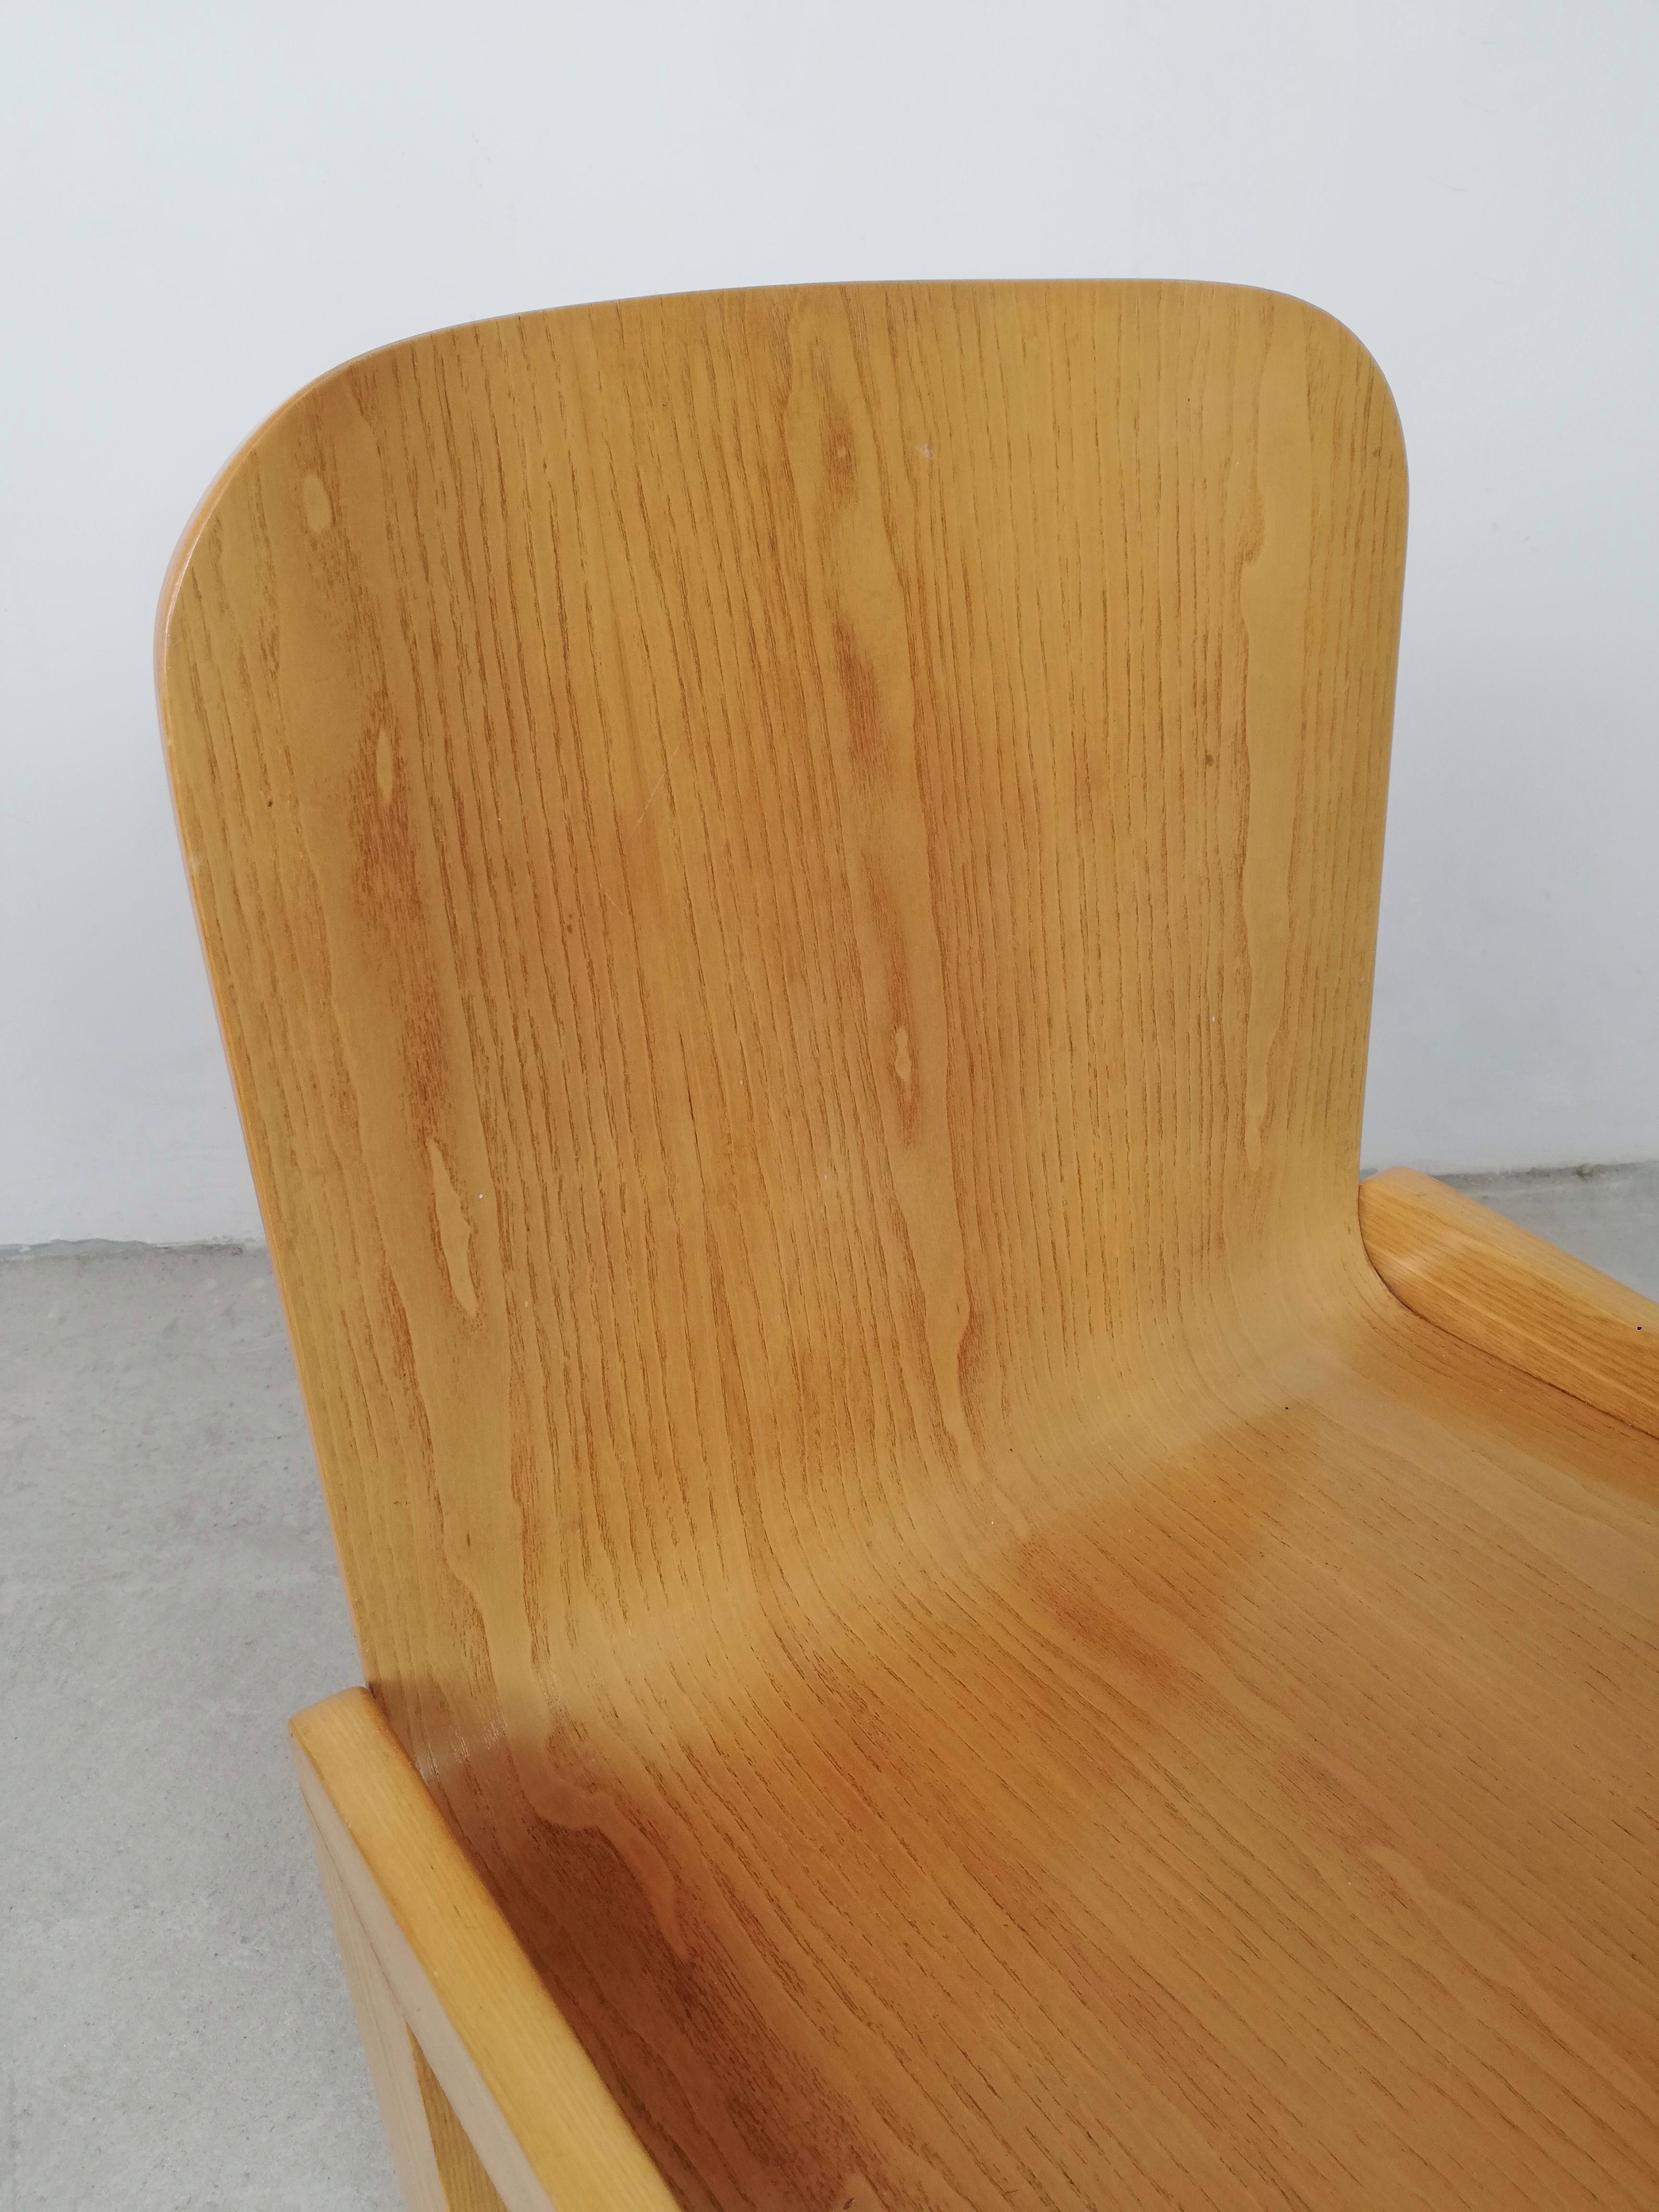 6 Curved Plywood Dining Chairs by Molteni in the style of Scarpa, Italy, 1970s For Sale 10